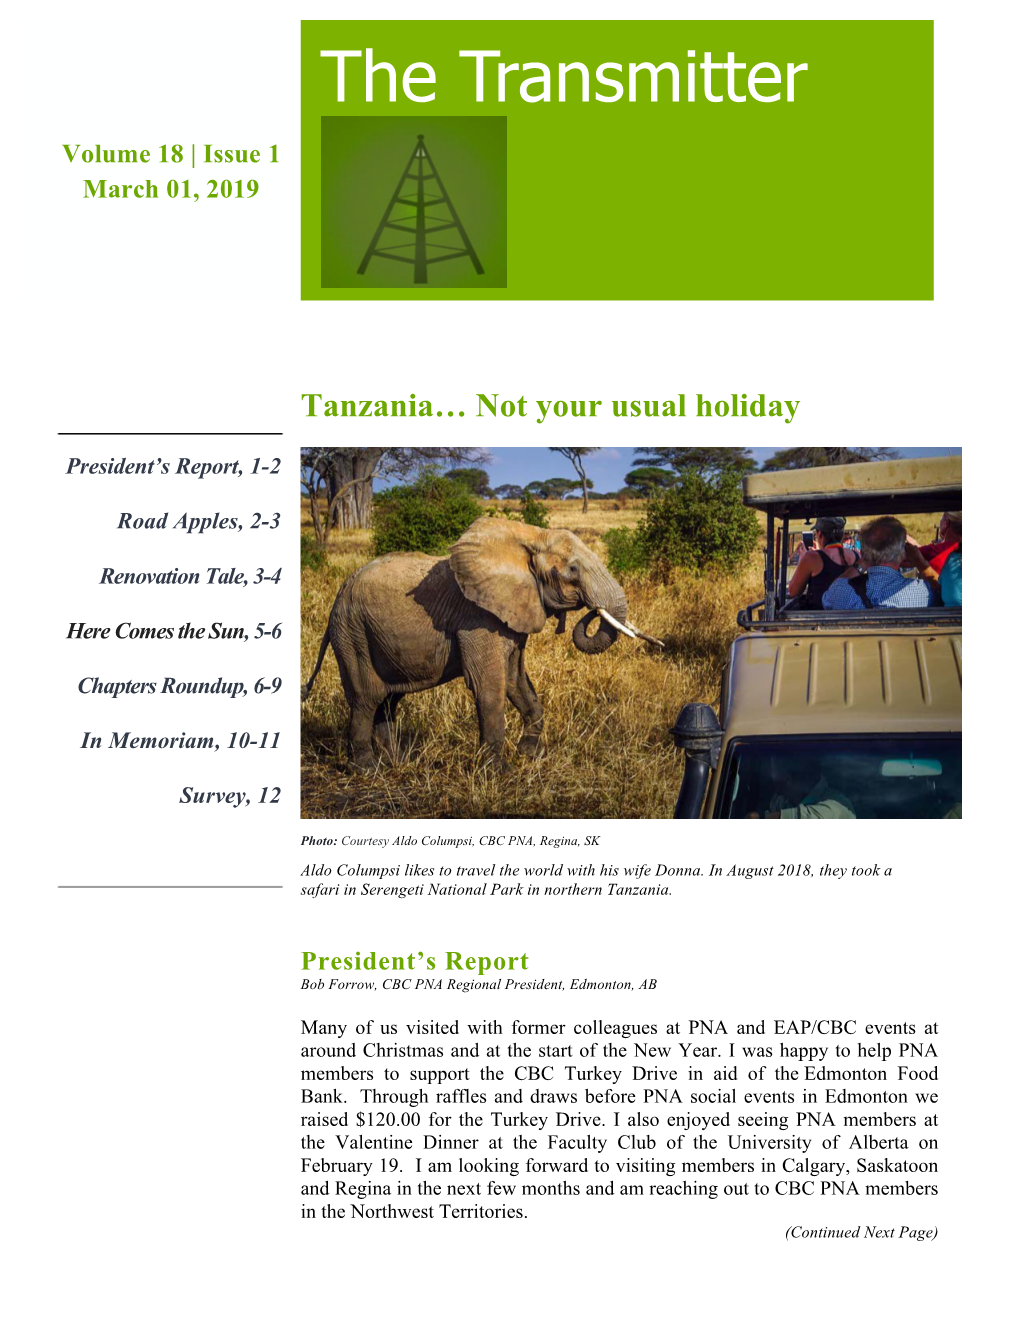 The Transmitter Volume 18 | Issue 1 March 01, 2019